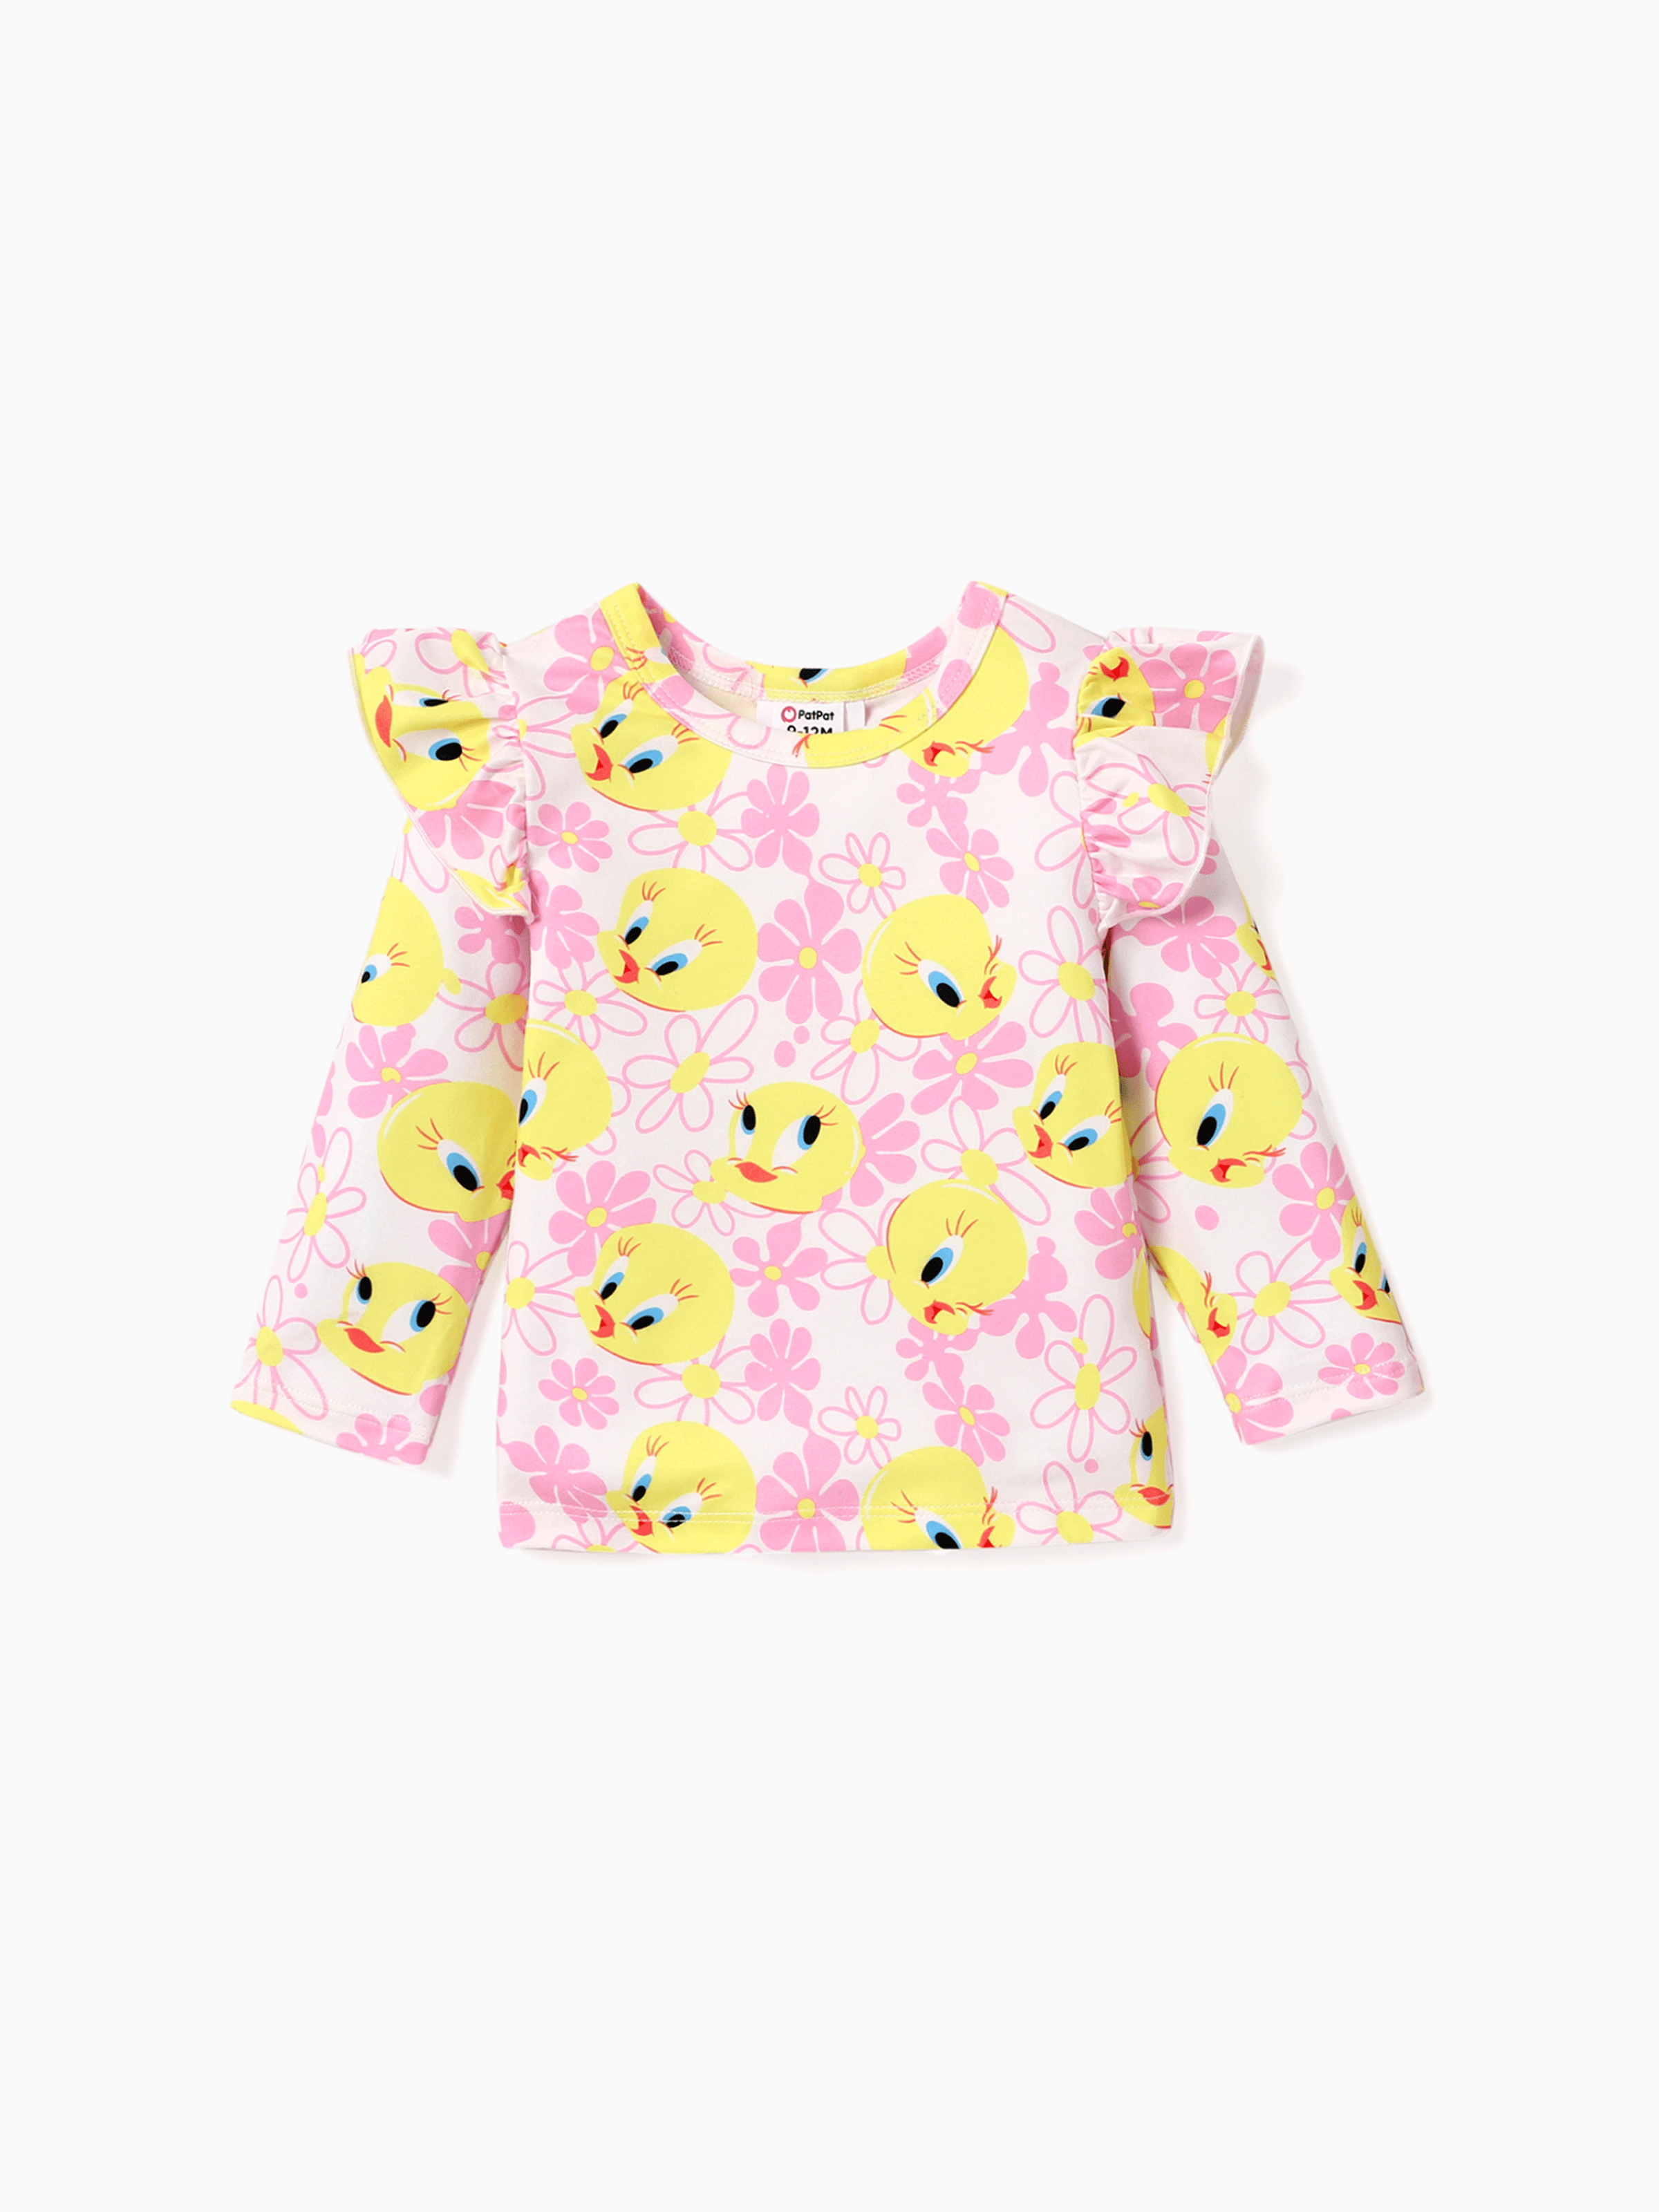 

Looney Tunes Baby Girl Floral Print Top or Corduroy Sundress